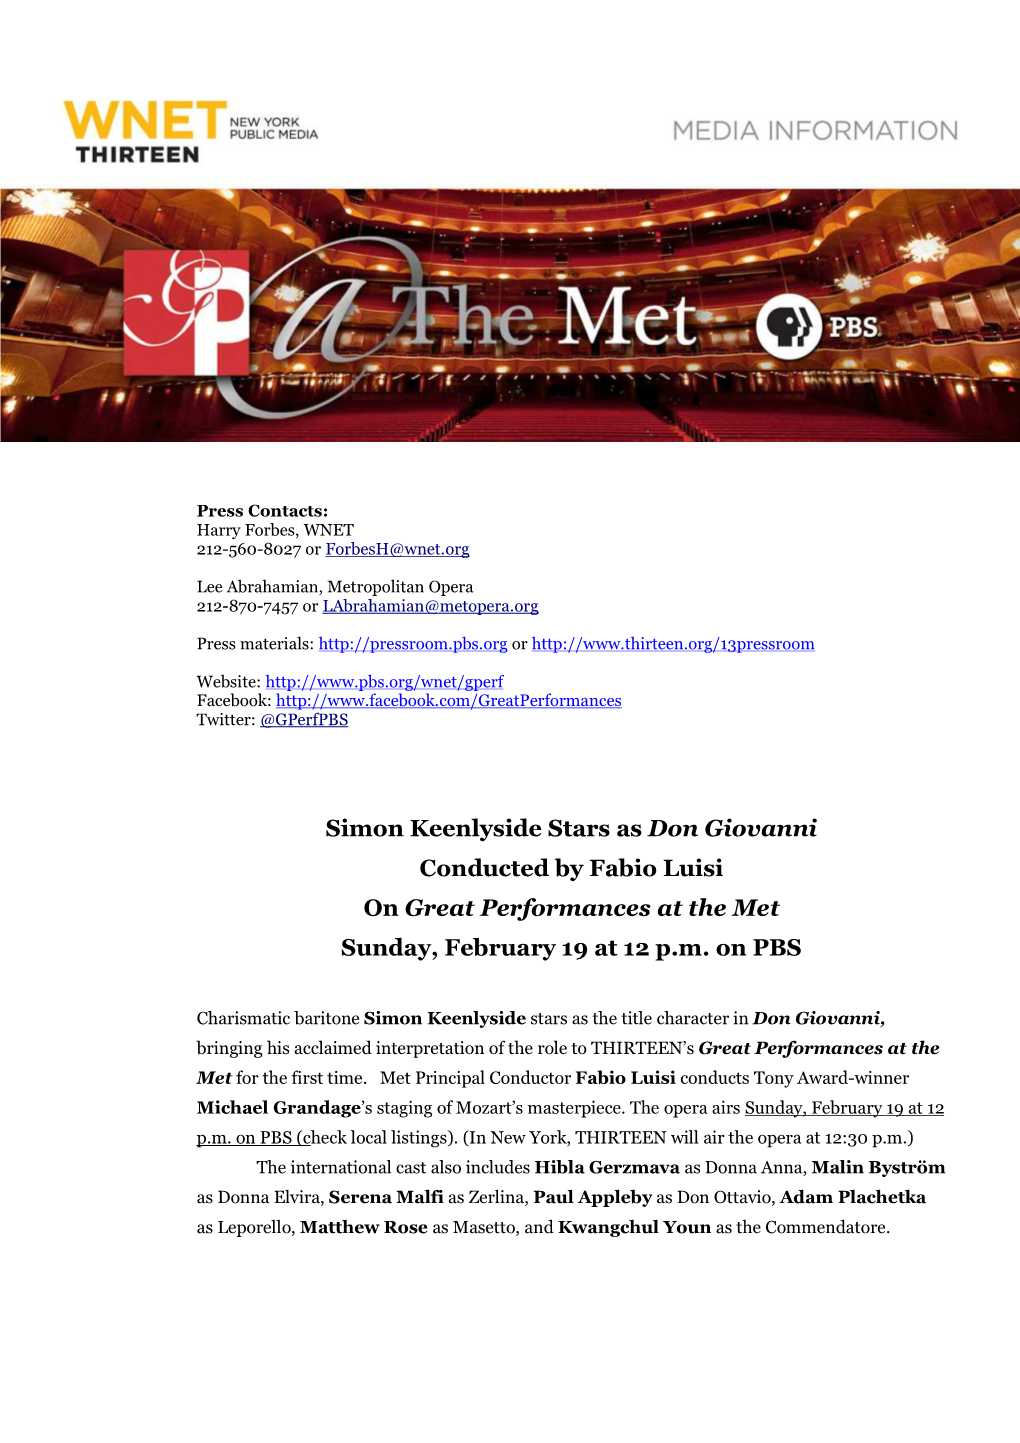 Don Giovanni Conducted by Fabio Luisi on Great Performances at the Met Sunday, February 19 at 12 P.M